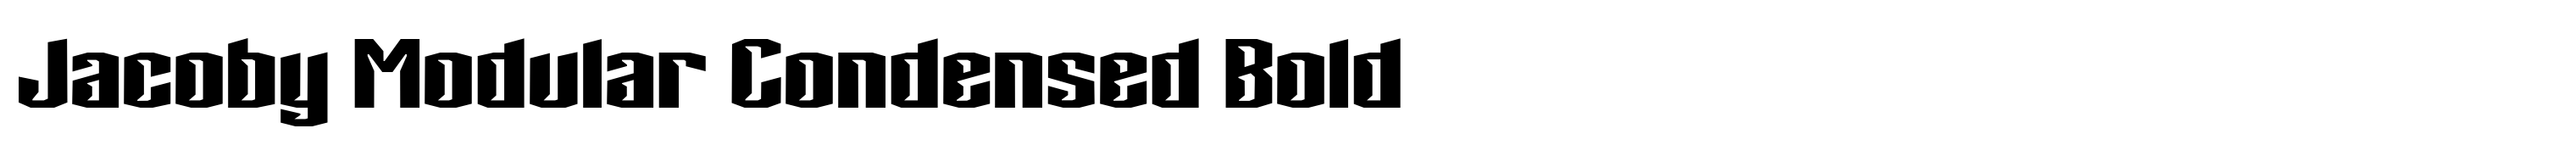 Jacoby Modular Condensed Bold